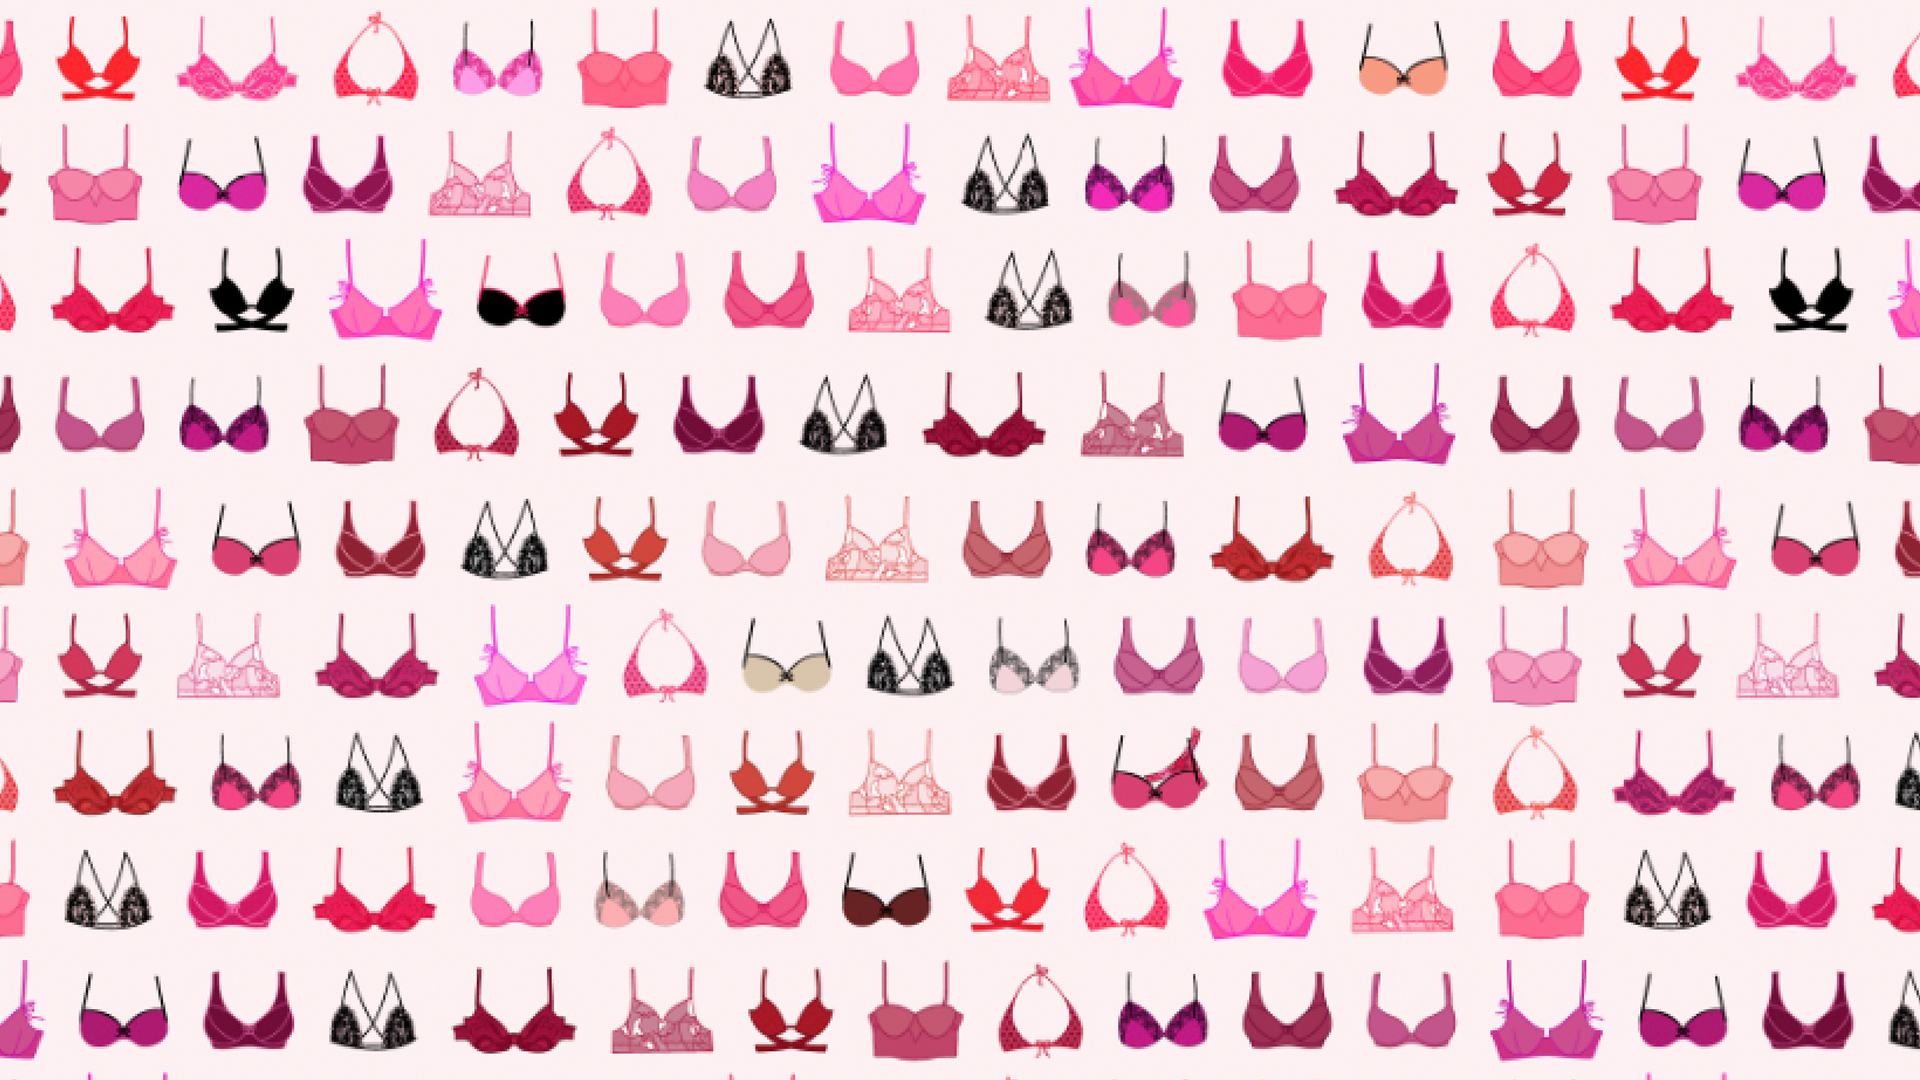 Can you find the knickers hidden among the bras in tricky brainteaser? Bra fitters reveal how to find the right cup-size